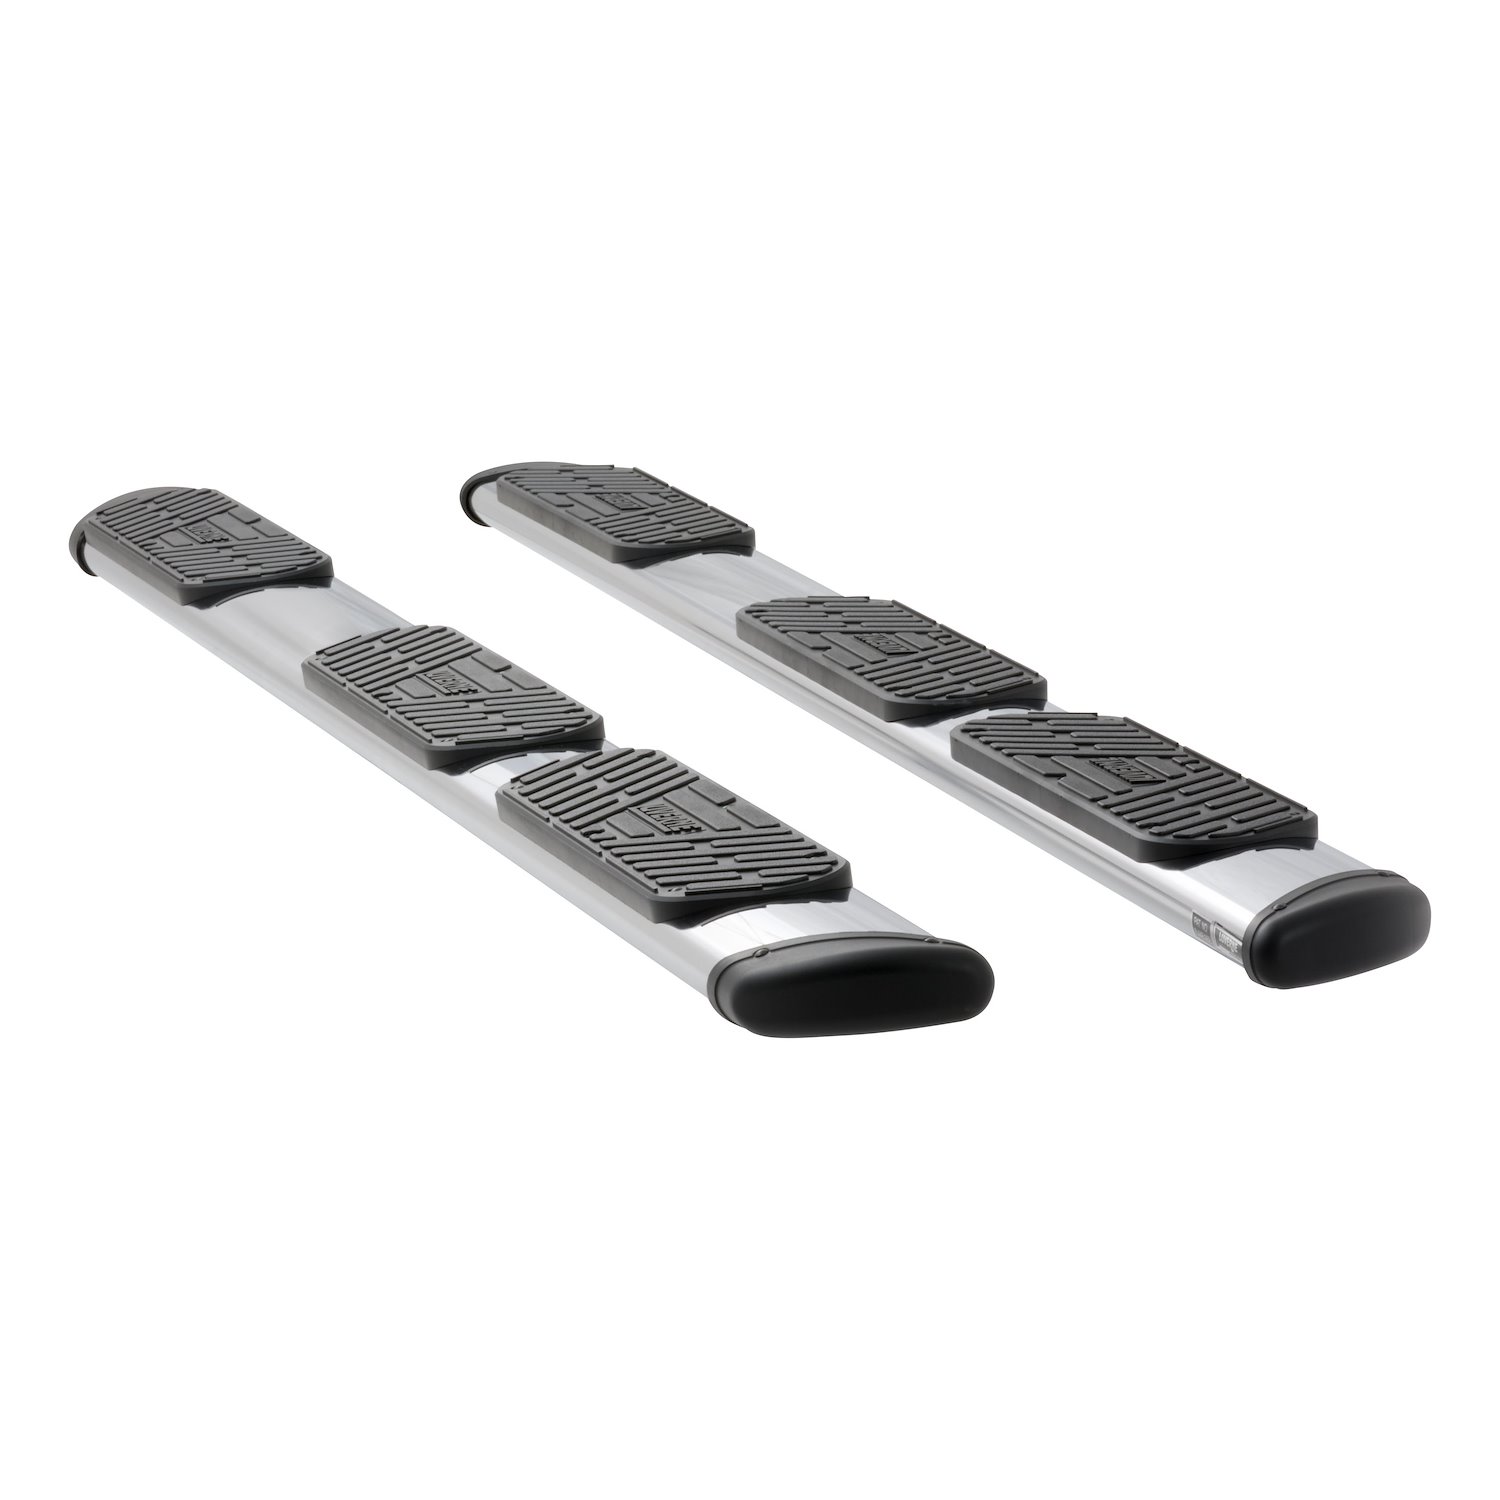 477113-400717 Regal 7 Polished Stainless 113 in. Oval W2W Steps Fits Select Chevy Silverado, GMC Sierra